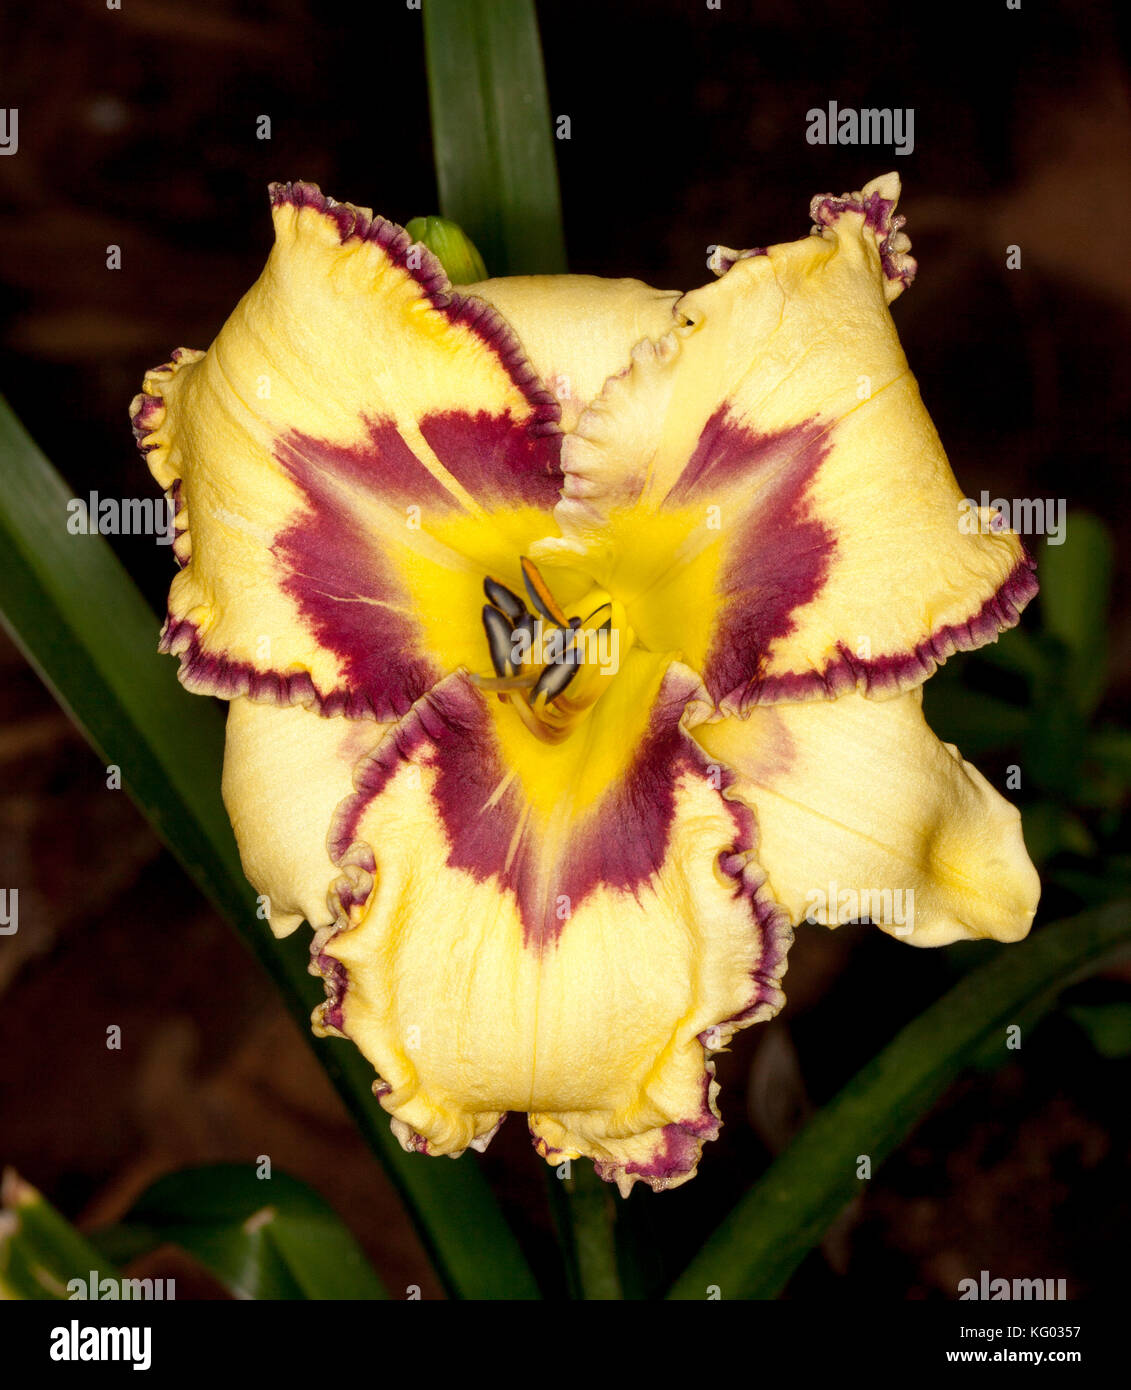 Spectacular yellow flower with dark red frilly edged petals of daylily, Hemerocallis 'Sunday Sandals - on dark background Stock Photo